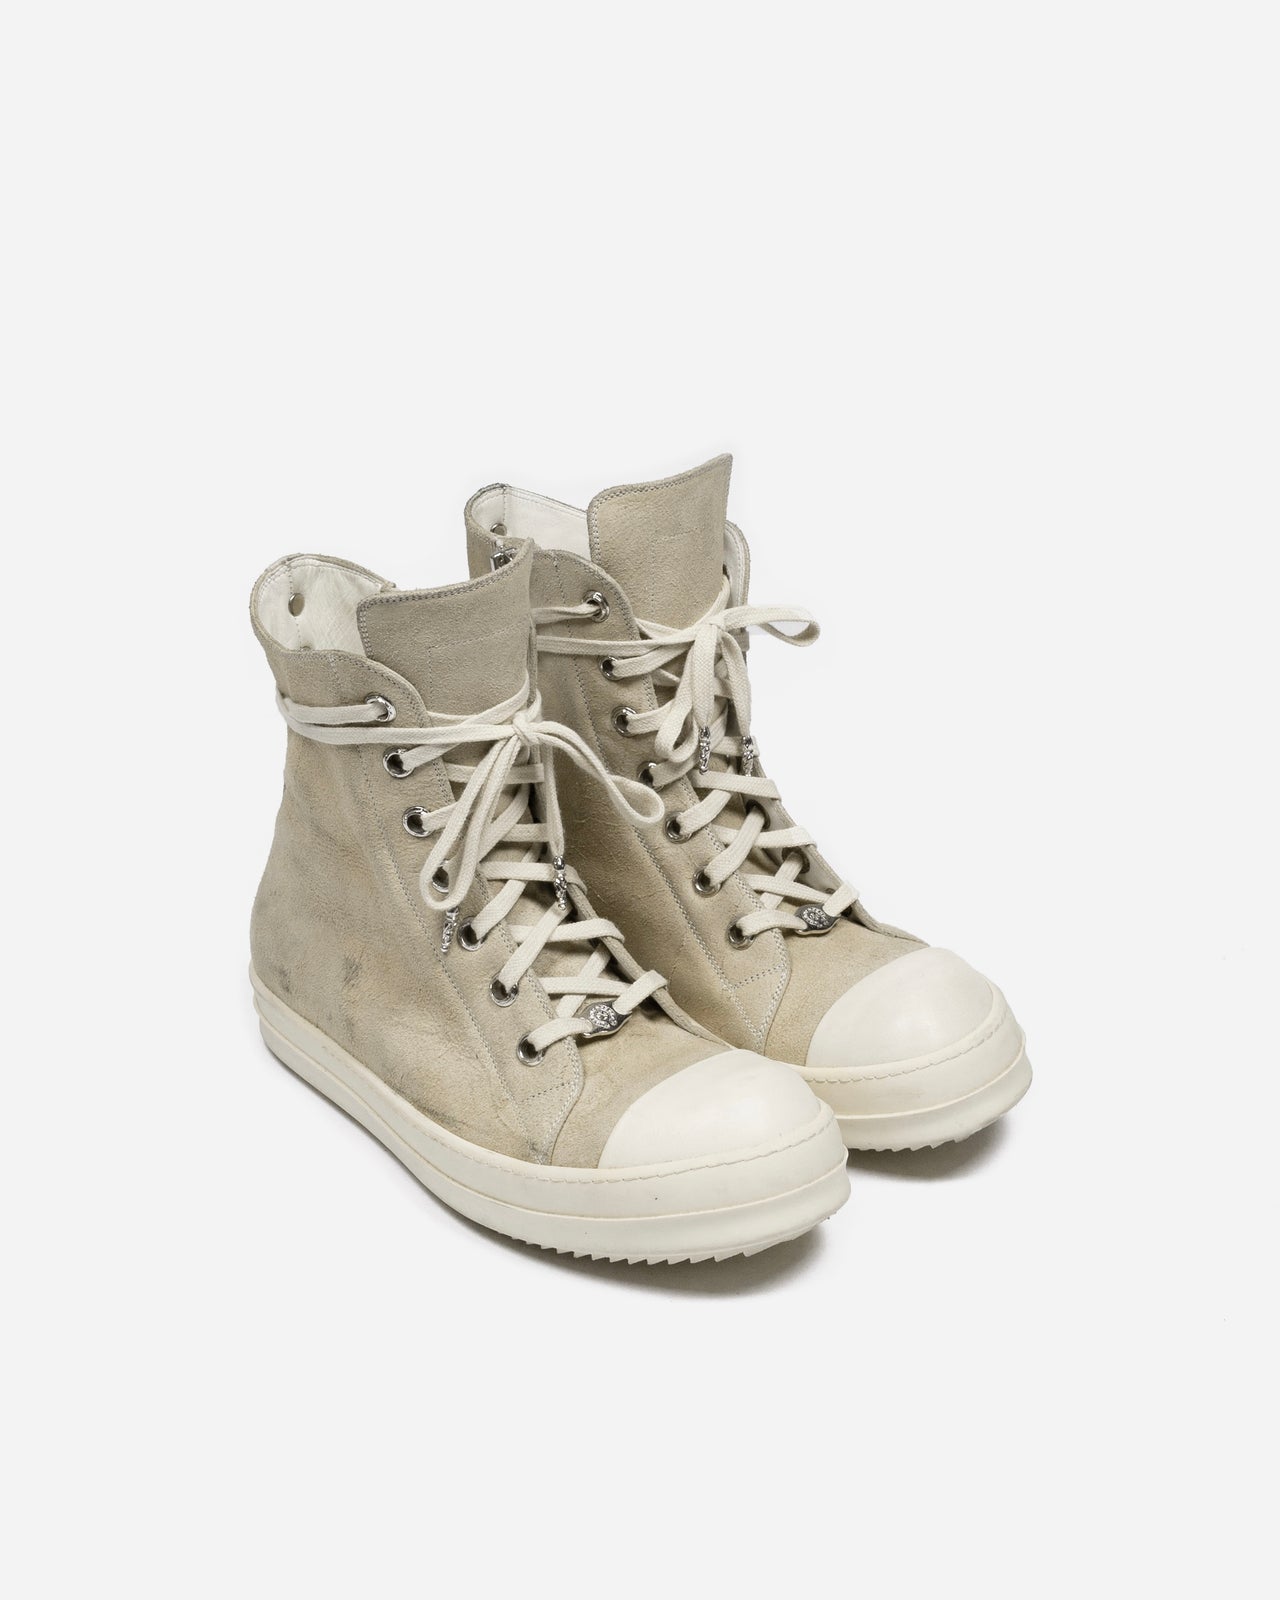 Rick Owens x Chrome Hearts Suede Ramones Sneakers